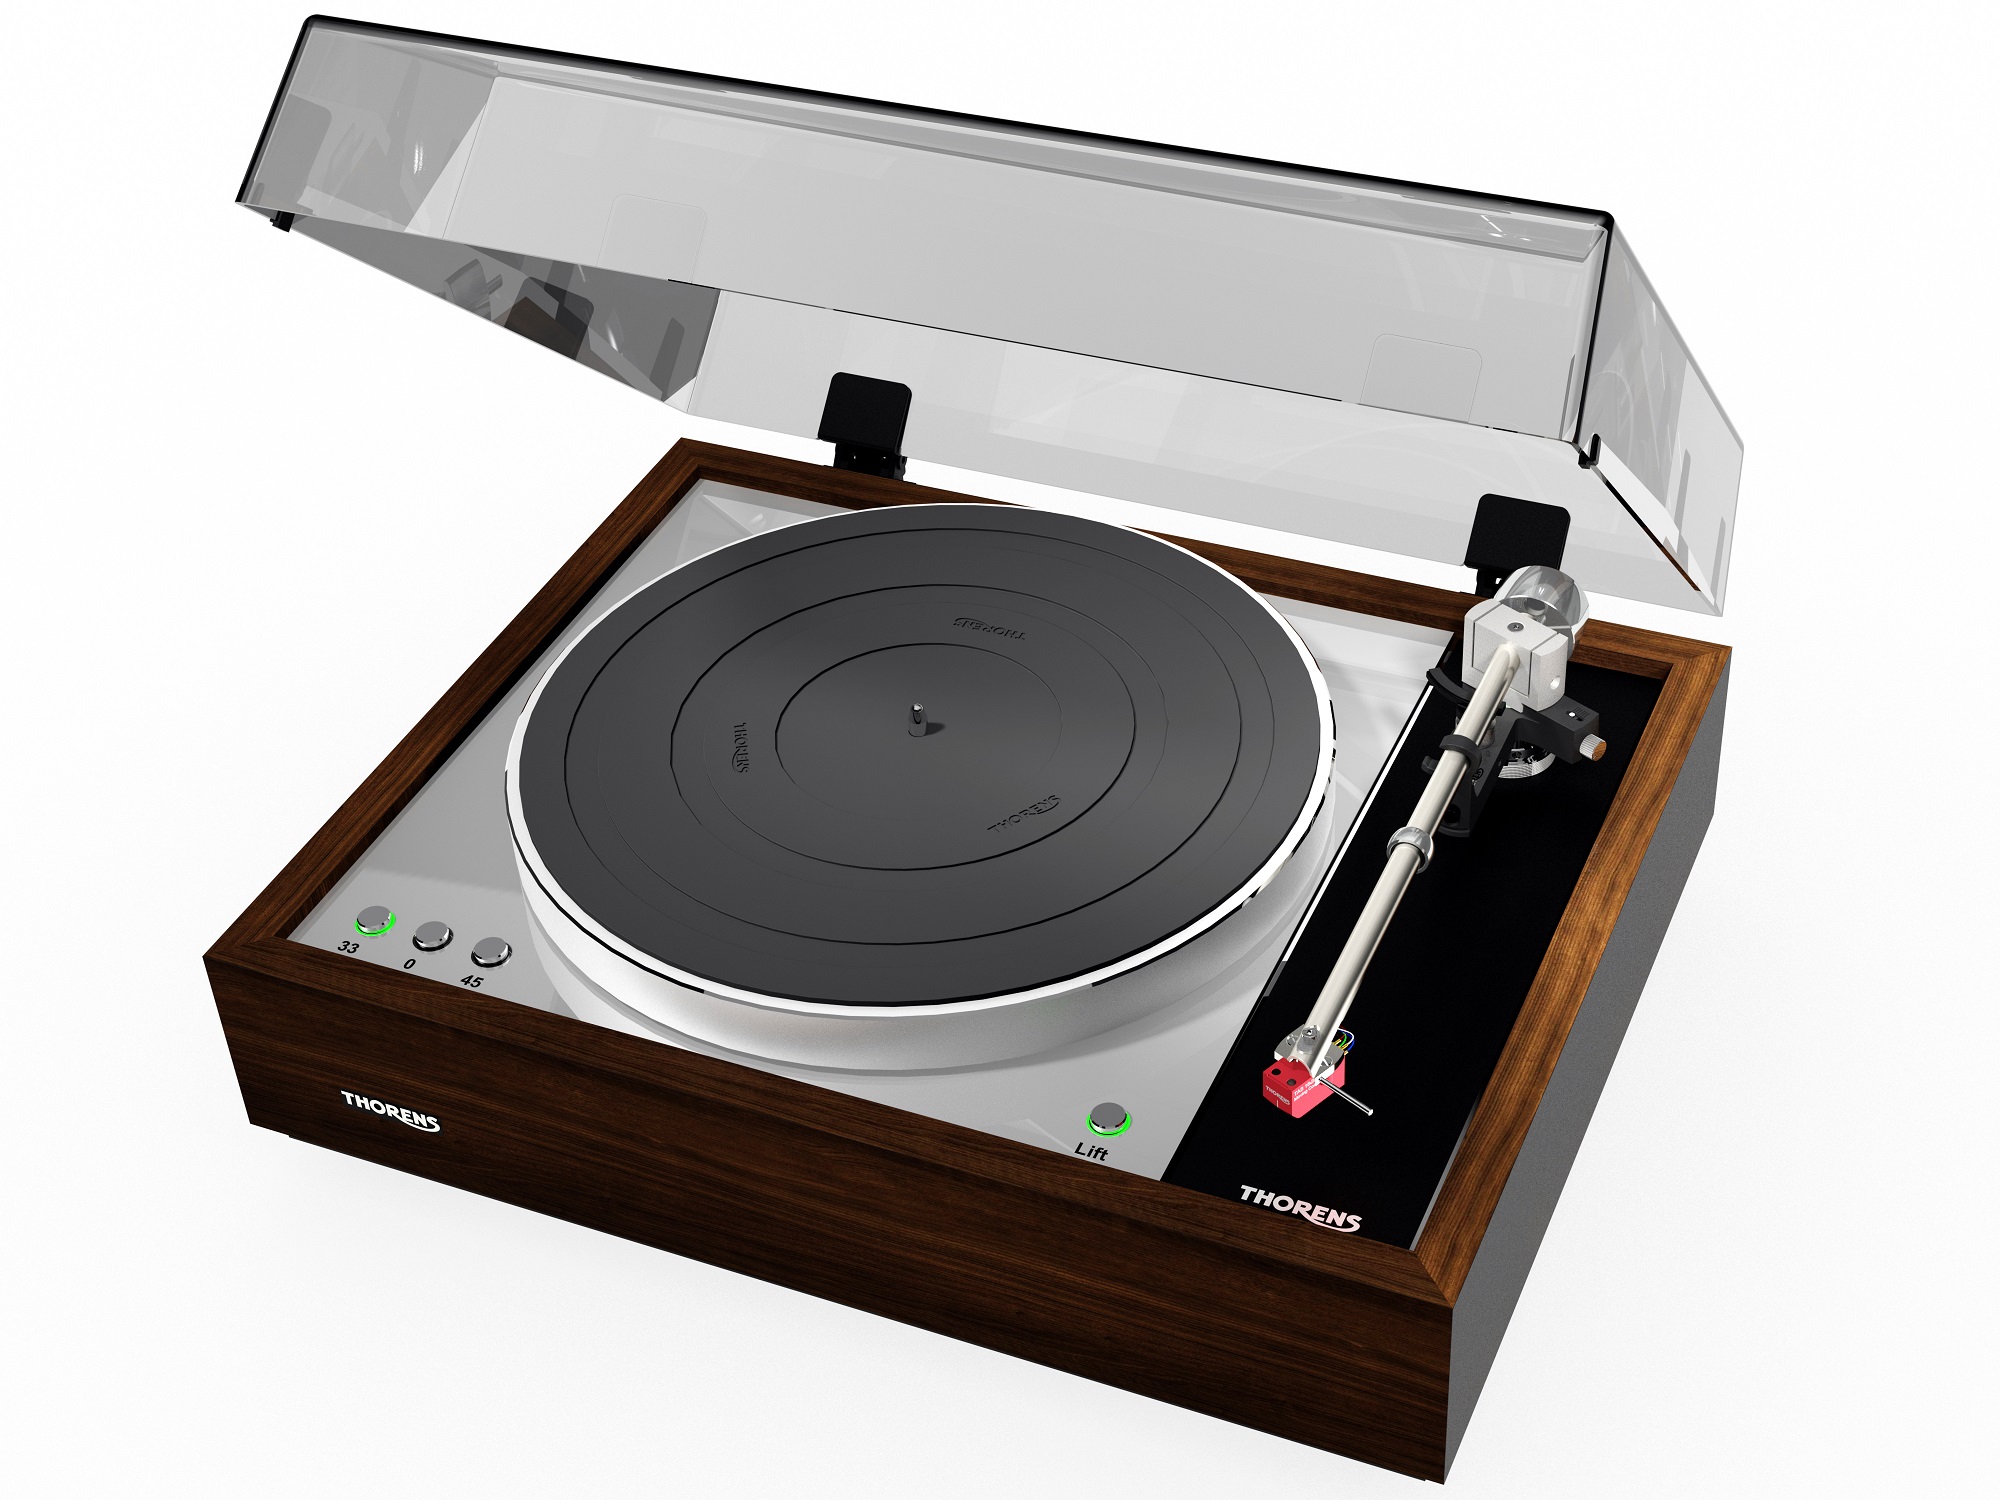 Fidelis welcomes the new range of Thorens turntables to our mix!